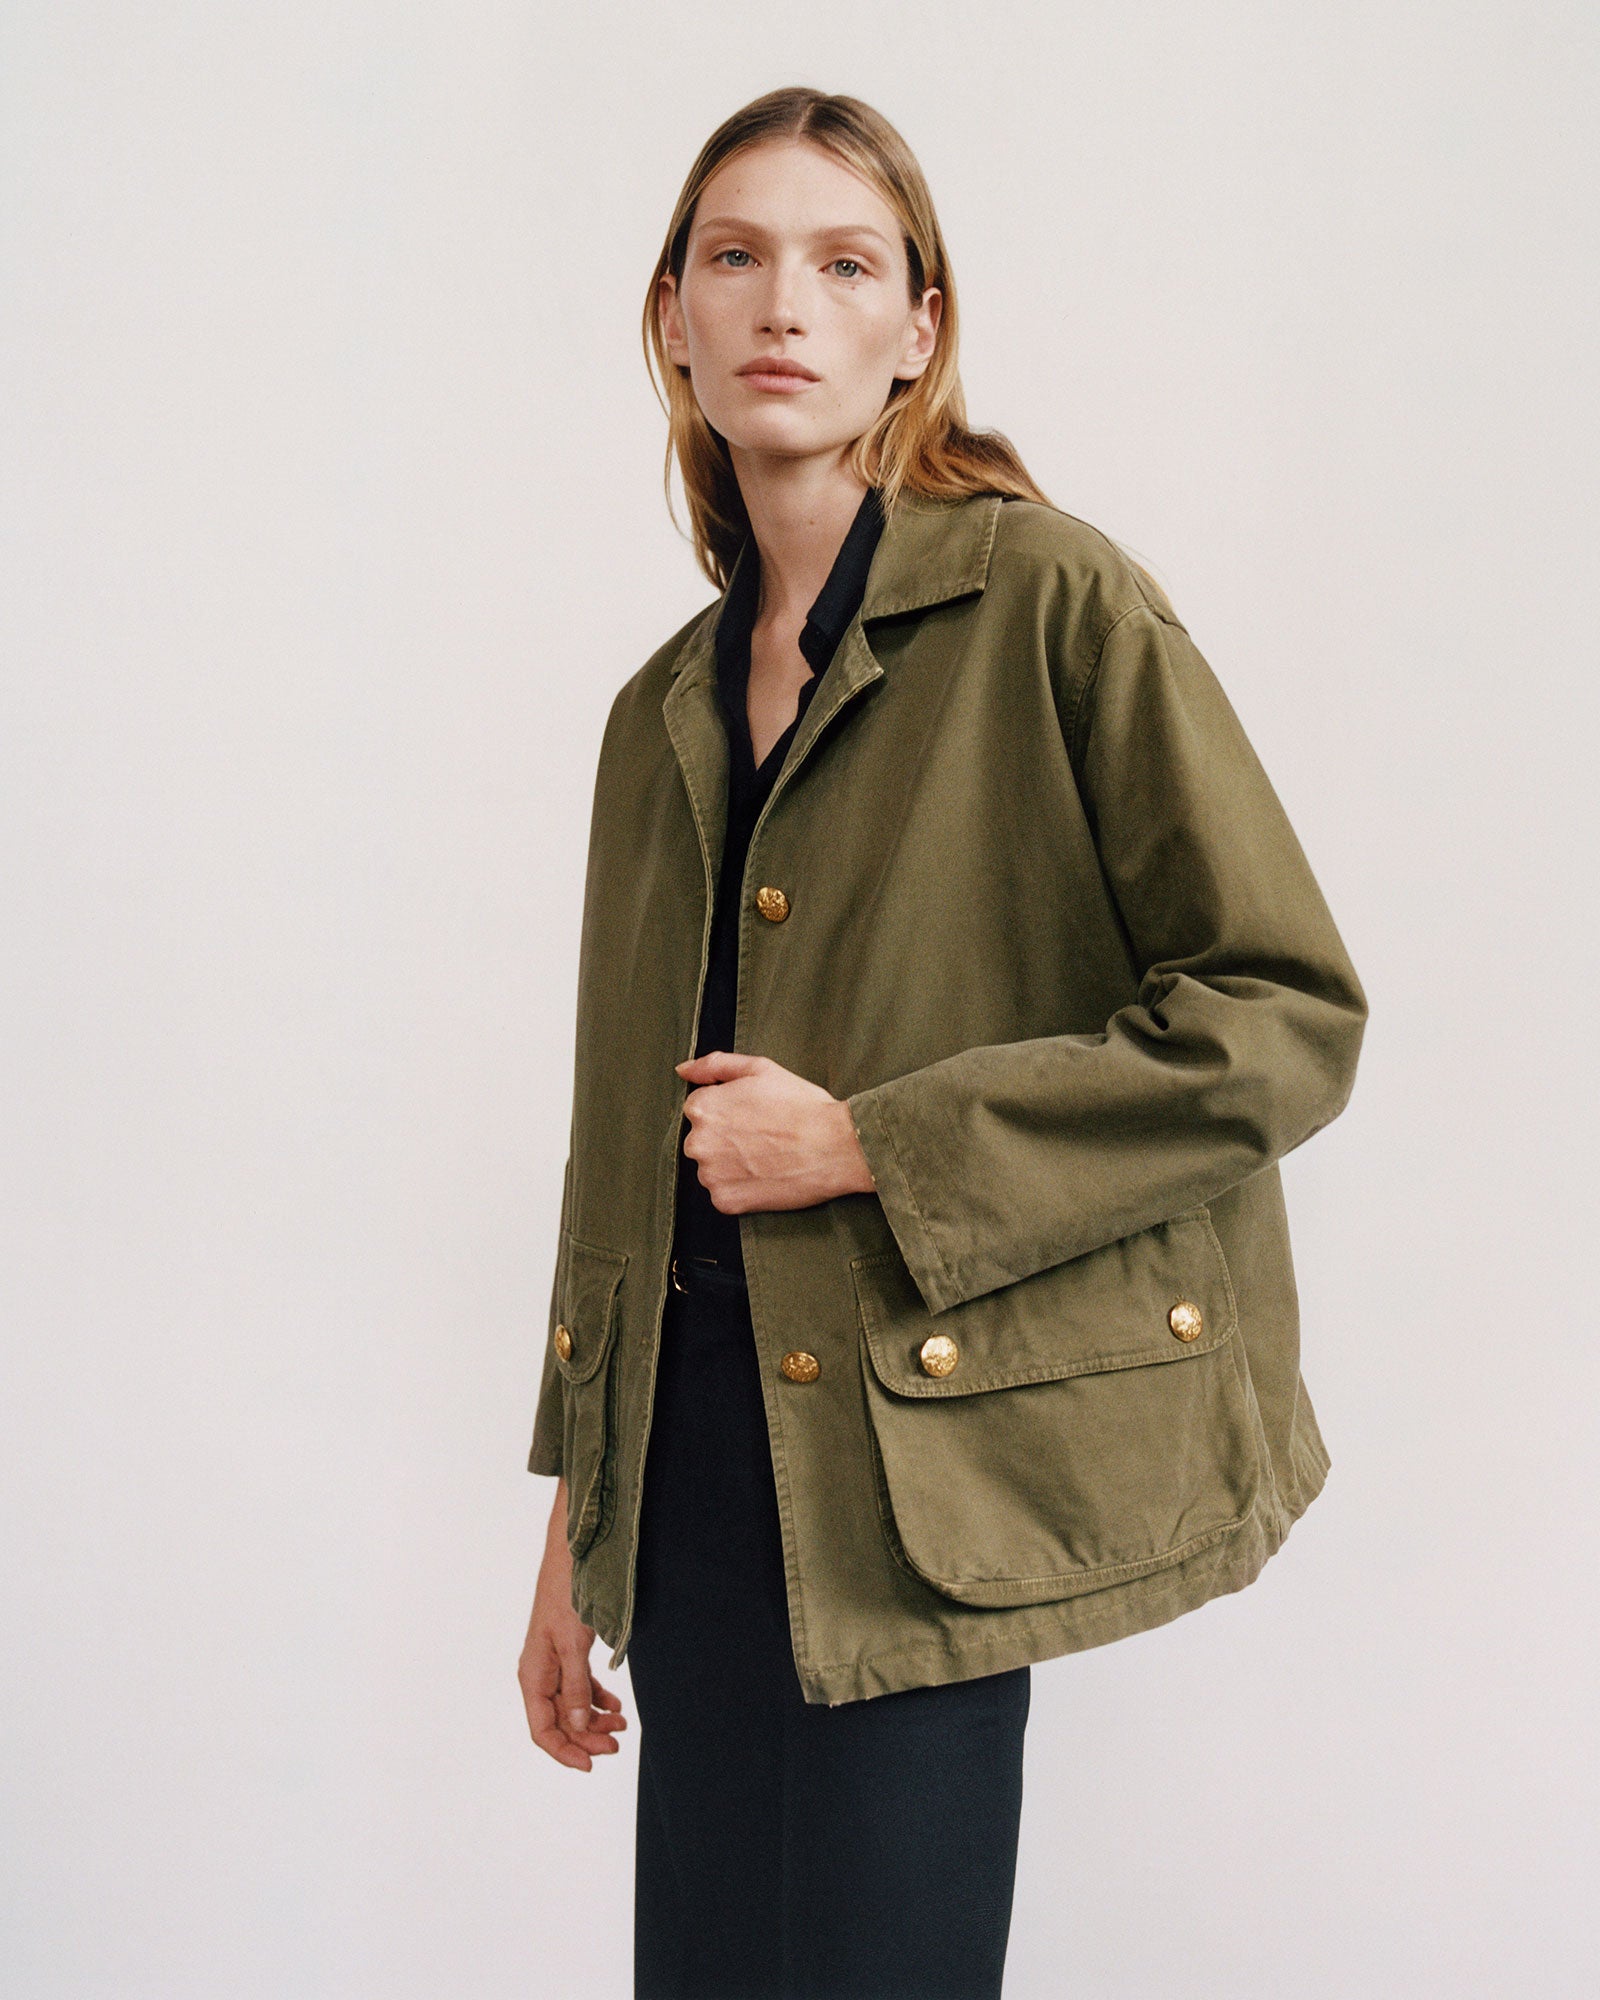 CONNOR JACKET WITH GOLD BUTTONS – Nili Lotan